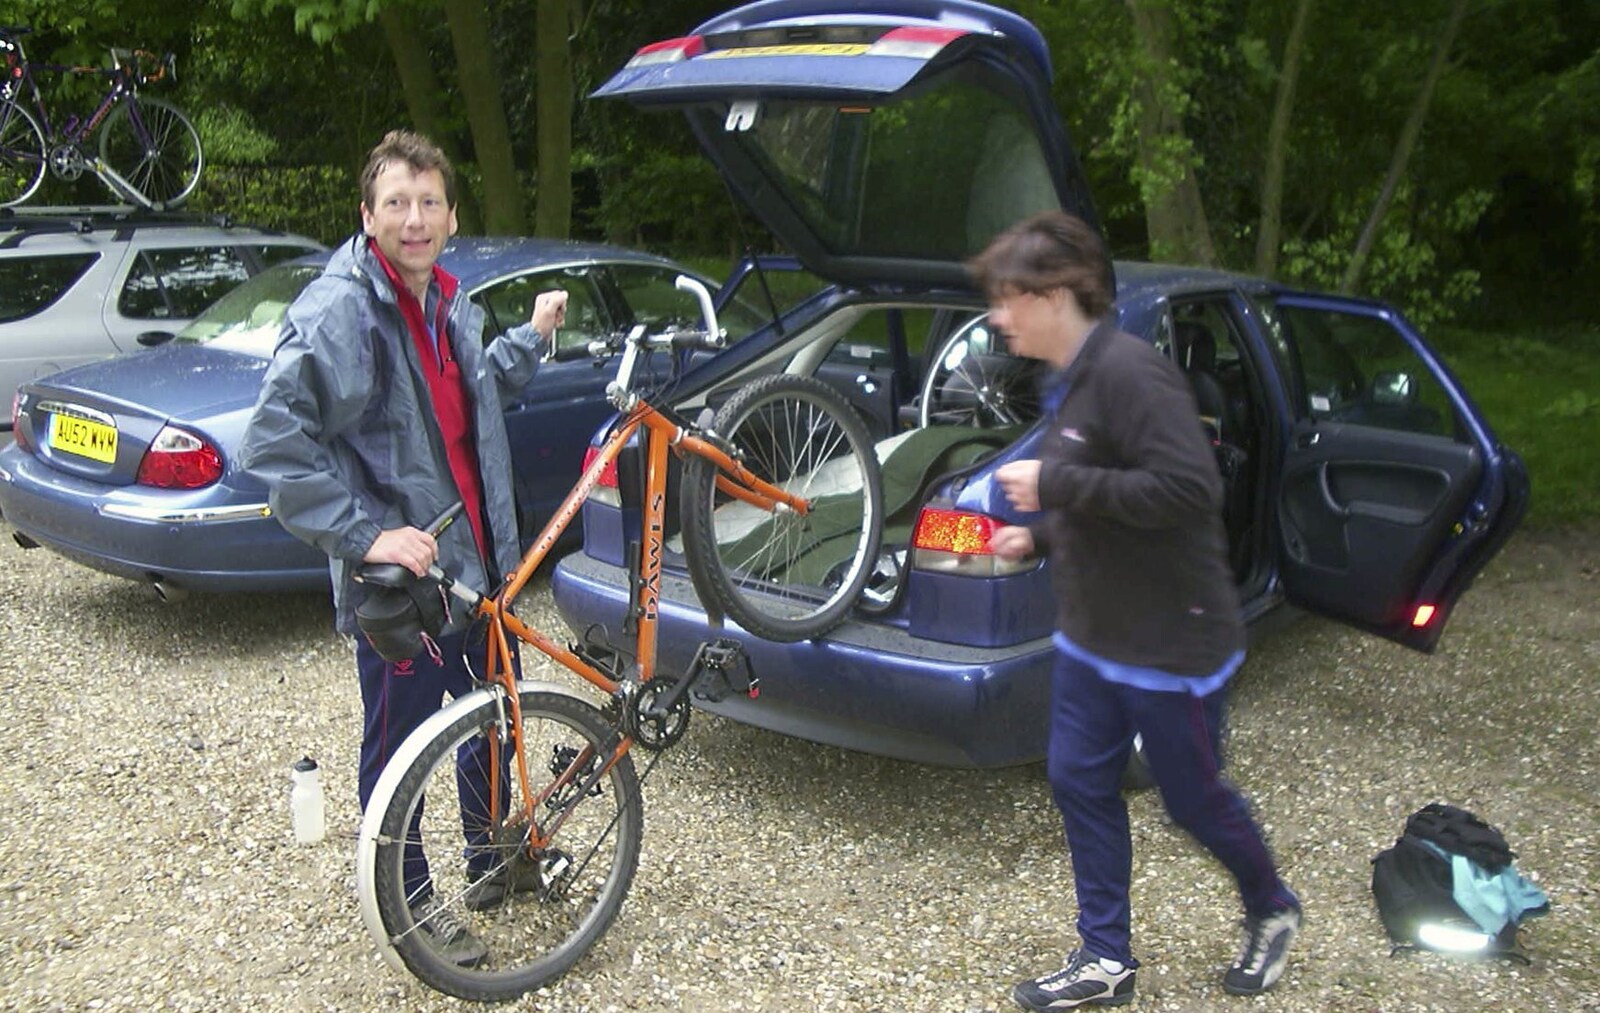 The BSCC Bike Ride Weekend, Kelling, Norfolk - 9th May 2003: Apple and Pippa put their bikes away